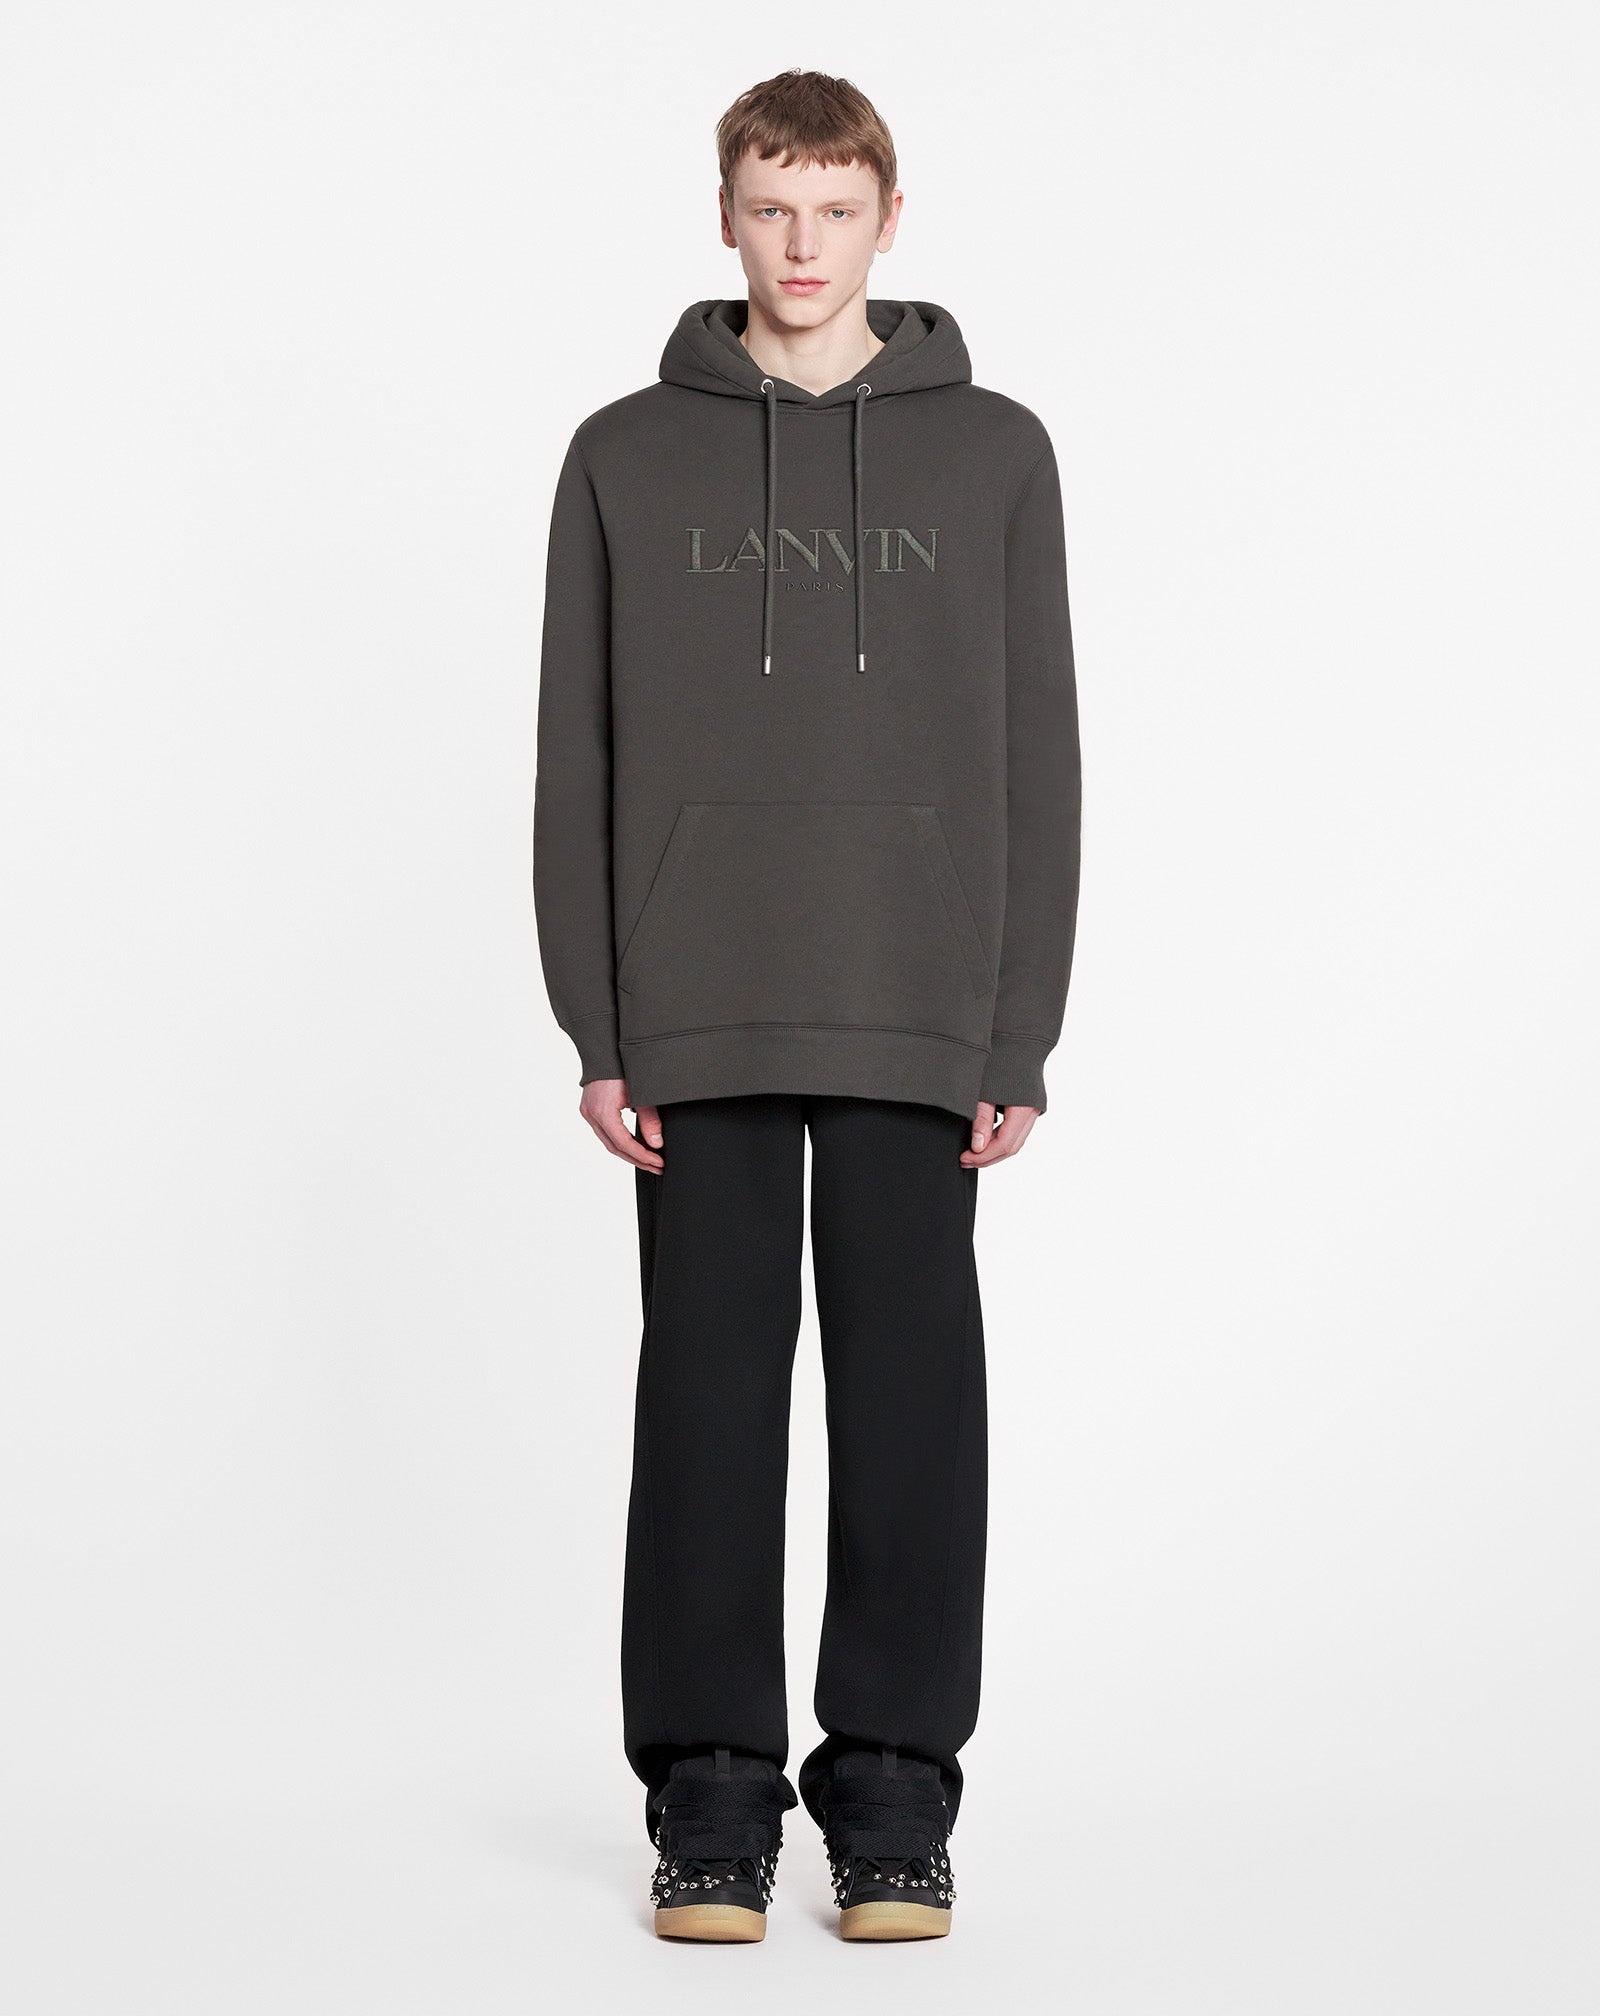 OVERSIZED LANVIN PARIS EMBROIDERED HOODIE - 2